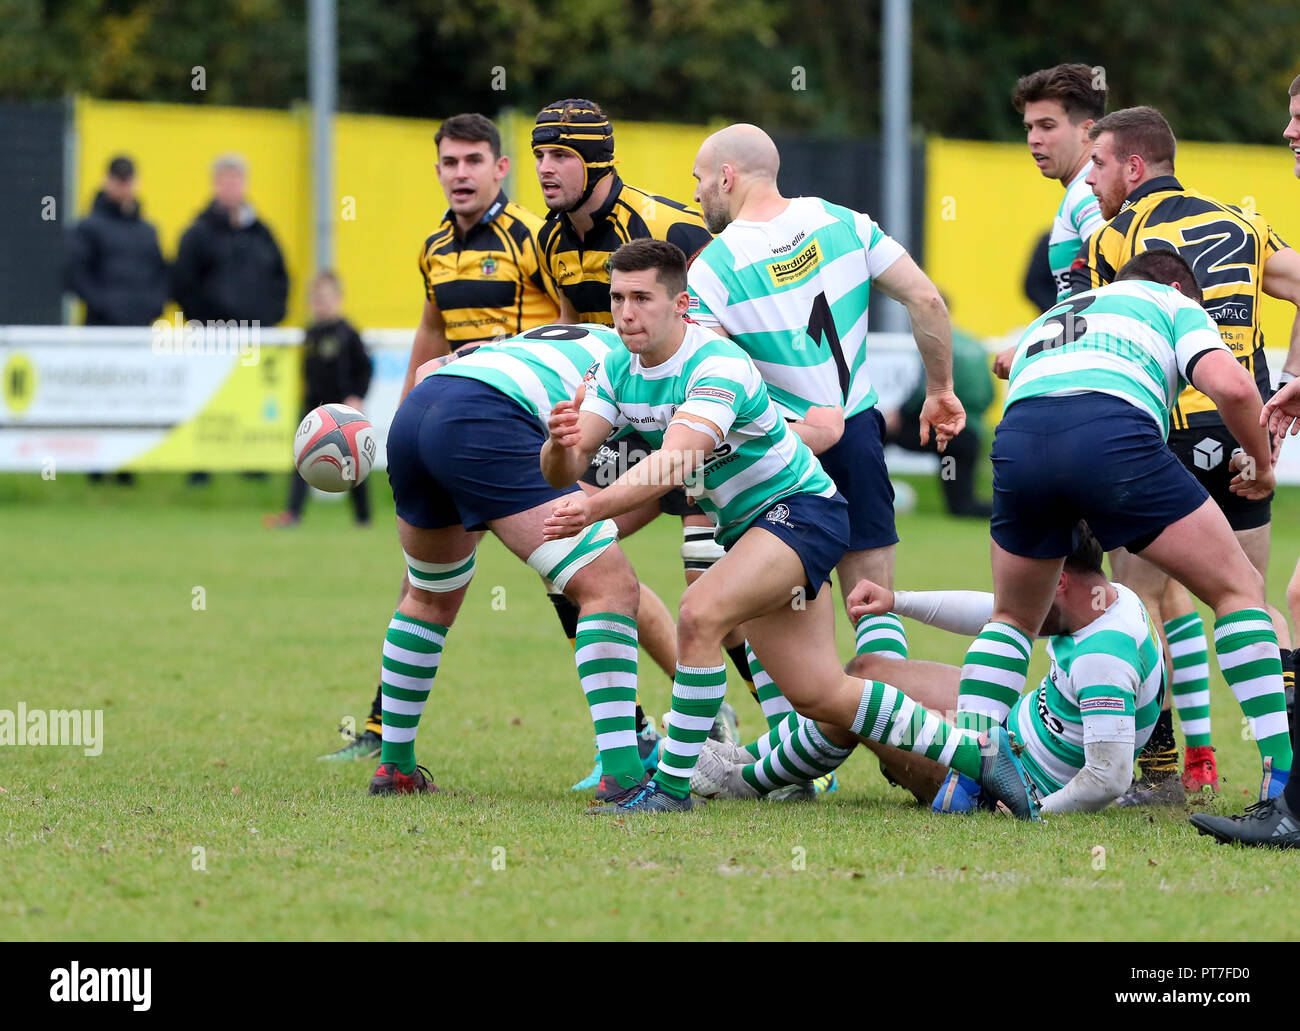 Leicester, England. Rugby Union, Hinckley rfc v South Leicester rfc.   Jacob Ham spins the ball out wide for South Leicester  during the RFU National League 2 North (NL2N) game played at the Leicester  Road Stadium.  © Phil Hutchinson / Alamy Live News Stock Photo